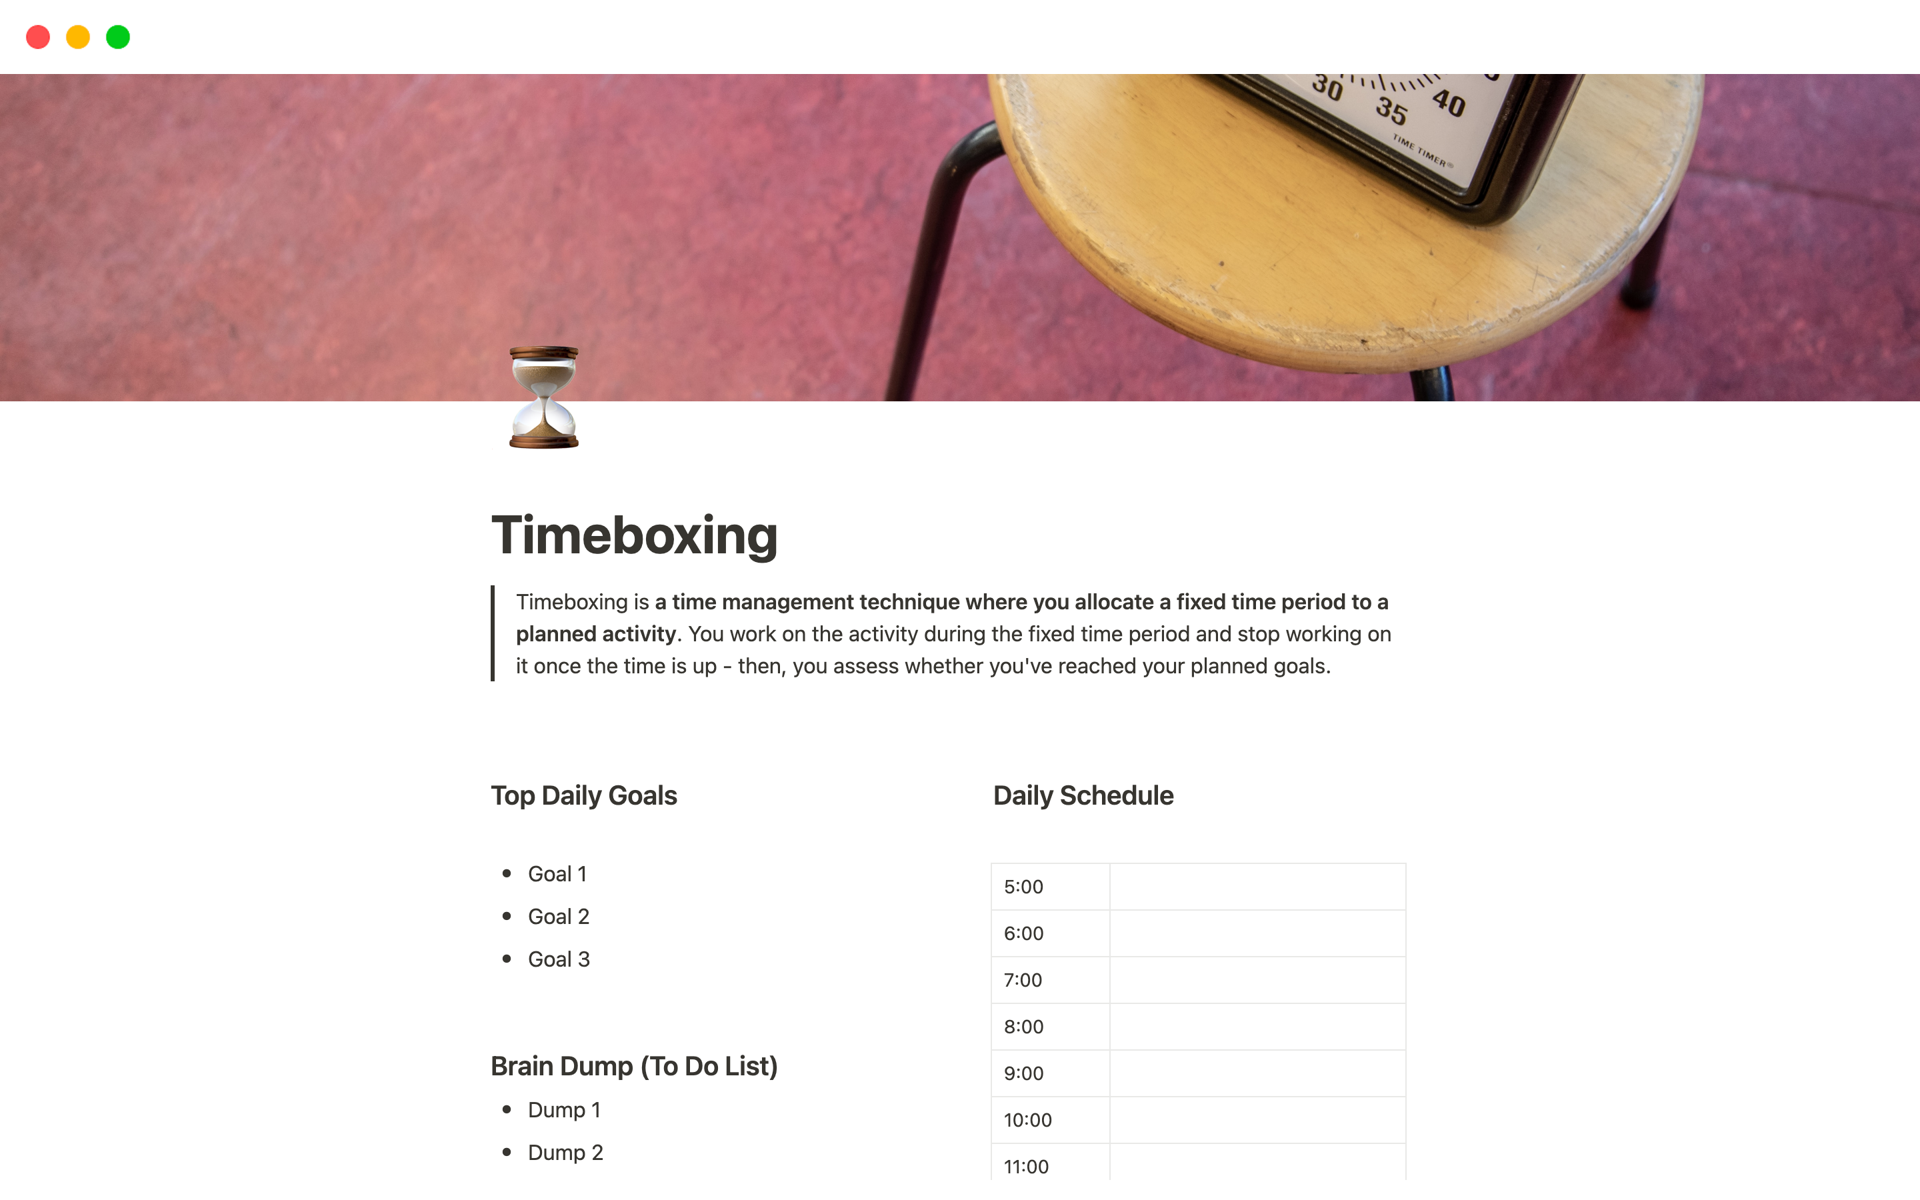 Timeboxing is a time management technique where you allocate a fixed time period to a planned activity. 